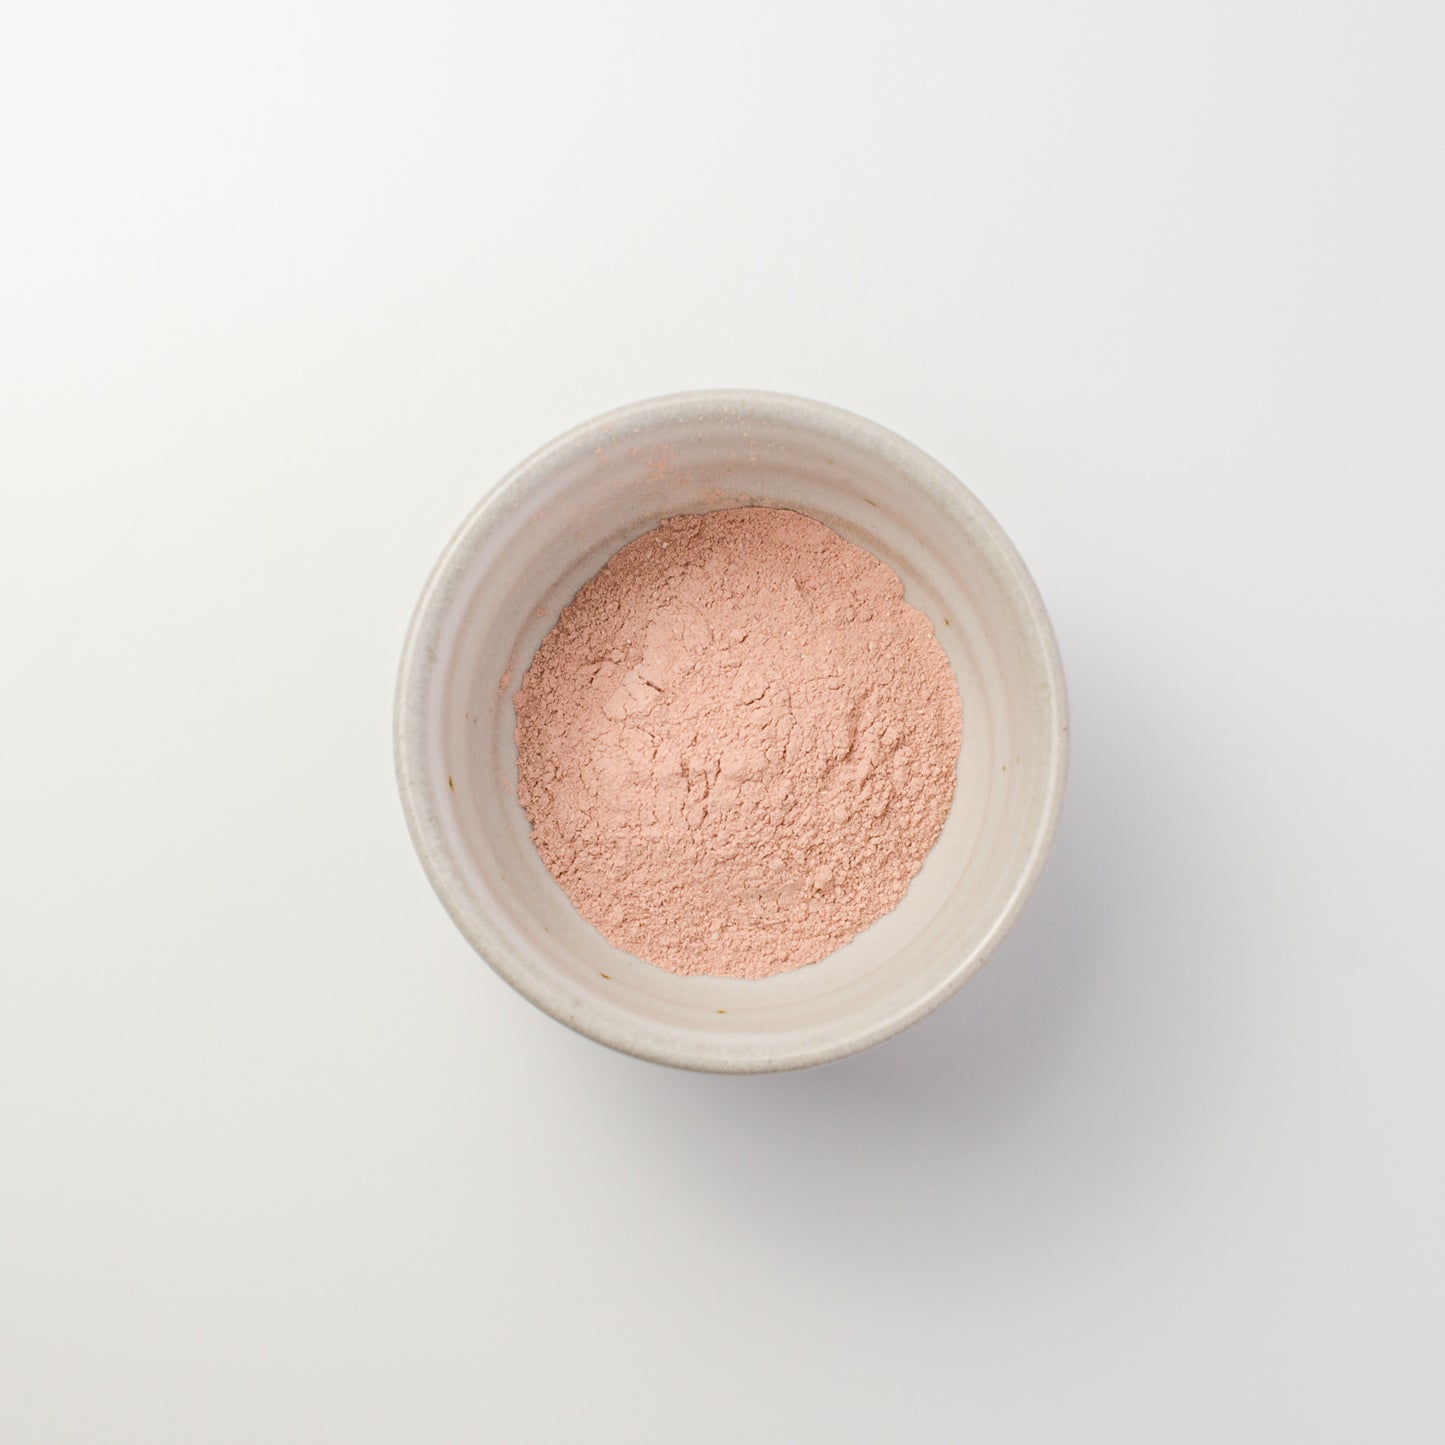 rose clay mask hibiscus pink facial grains mud mask dry texture